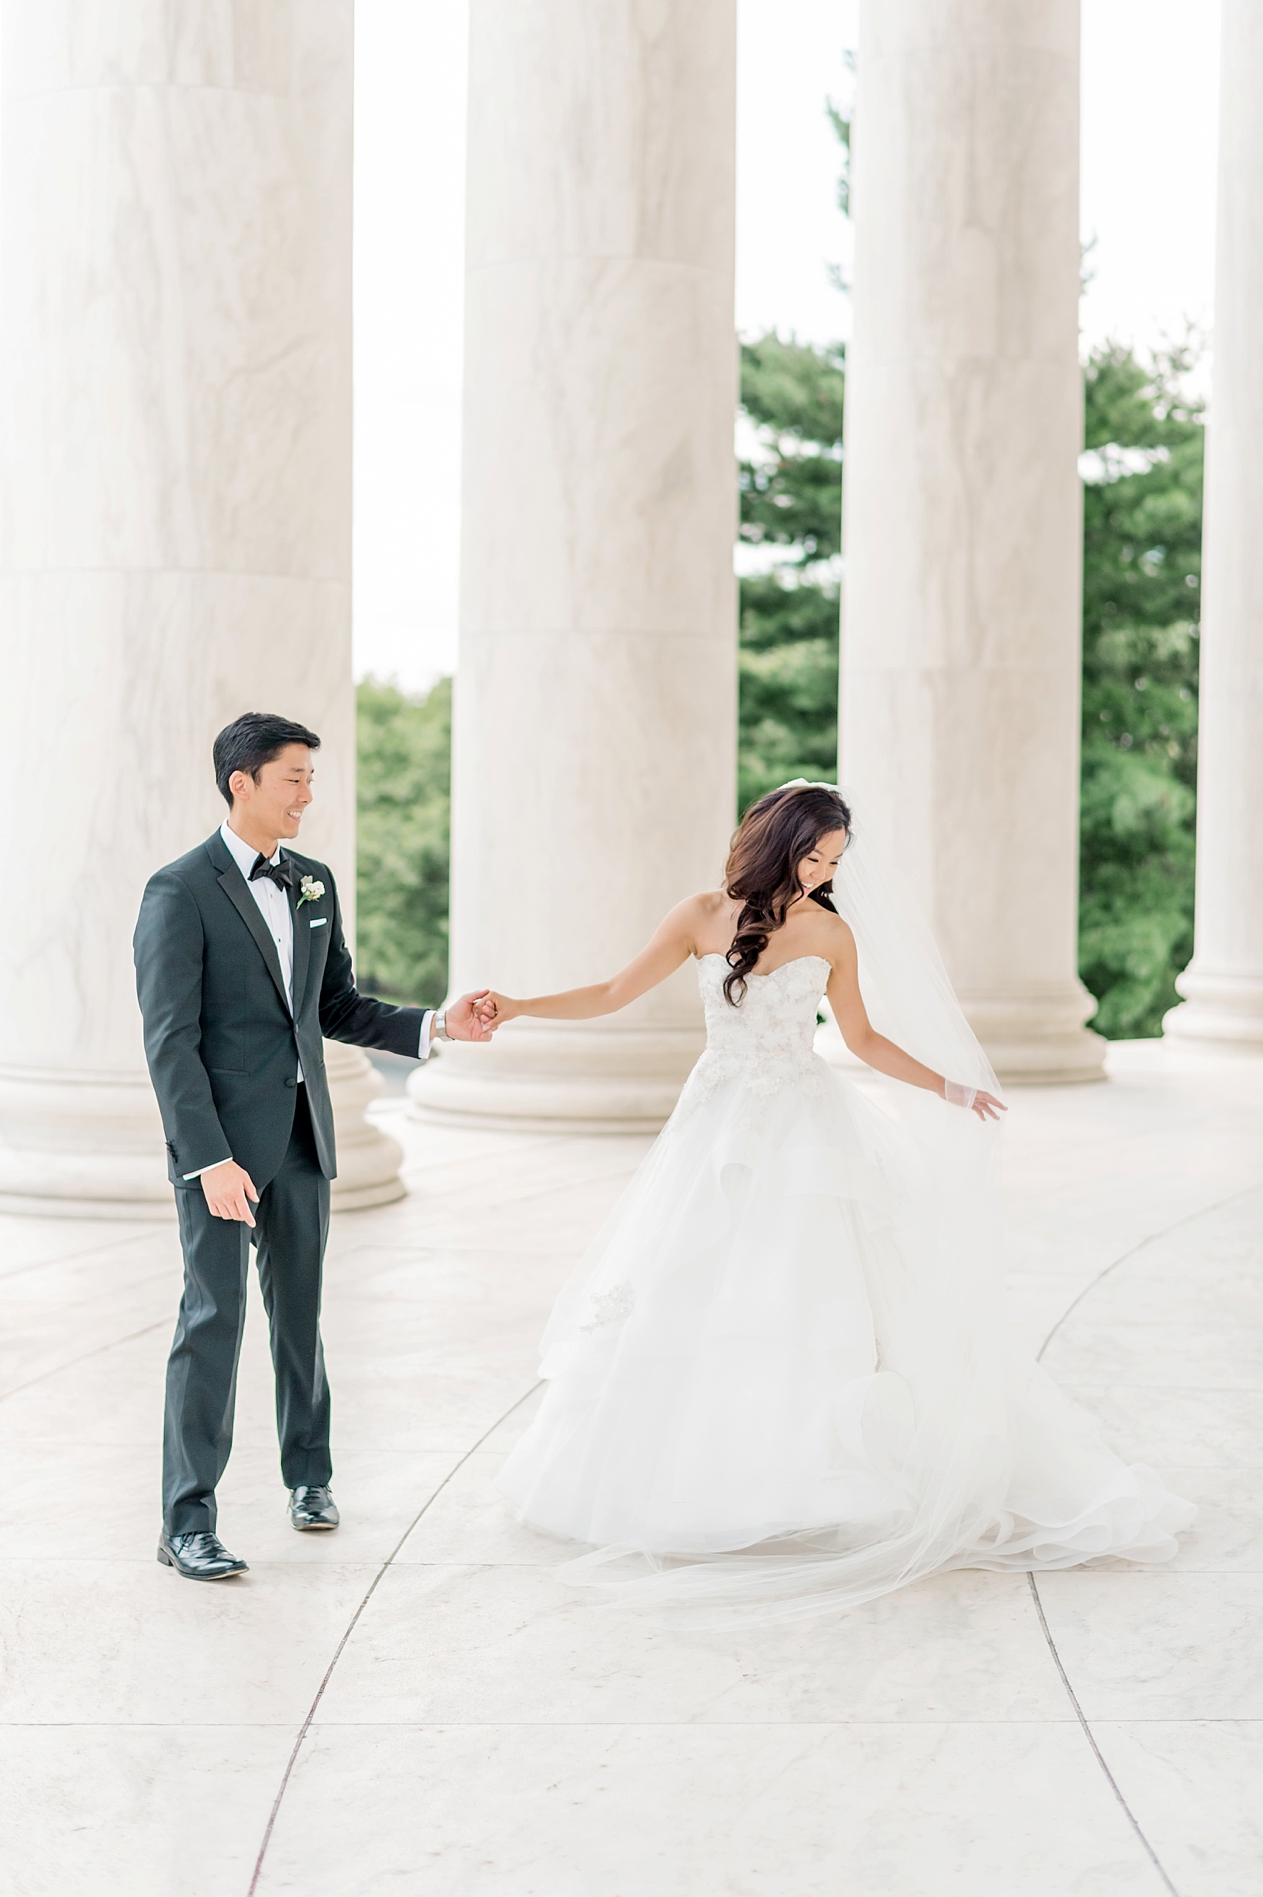 Wedding Photography Timeline Planning | For Brides | Light and Airy, Washington DC Bride + Groom Portraits by Fine Art Photographer Lauren R Swann